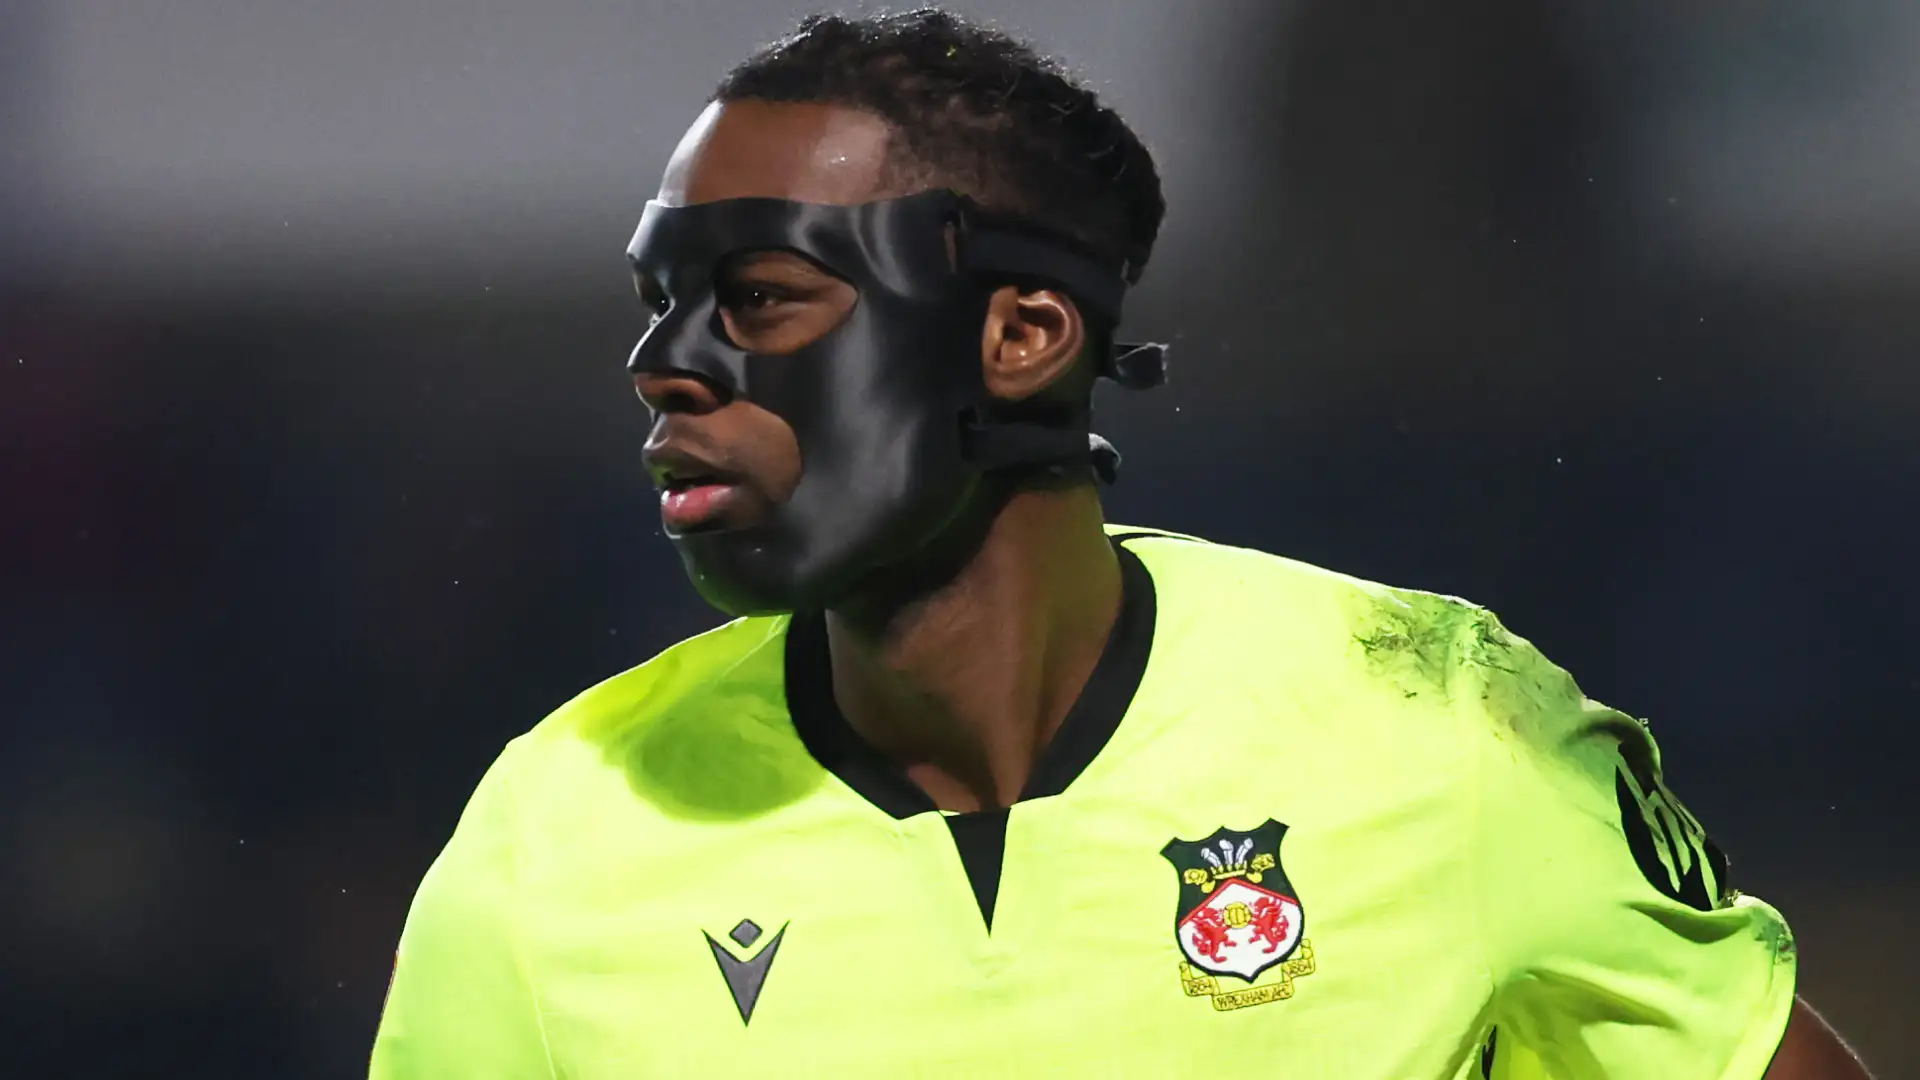 Wrexham goalkeeper Arthur Okonkwo reveals 'jealous' League Two rivals would try and 'fight' Ryan Reynolds and Rob McElhenney's side at full time